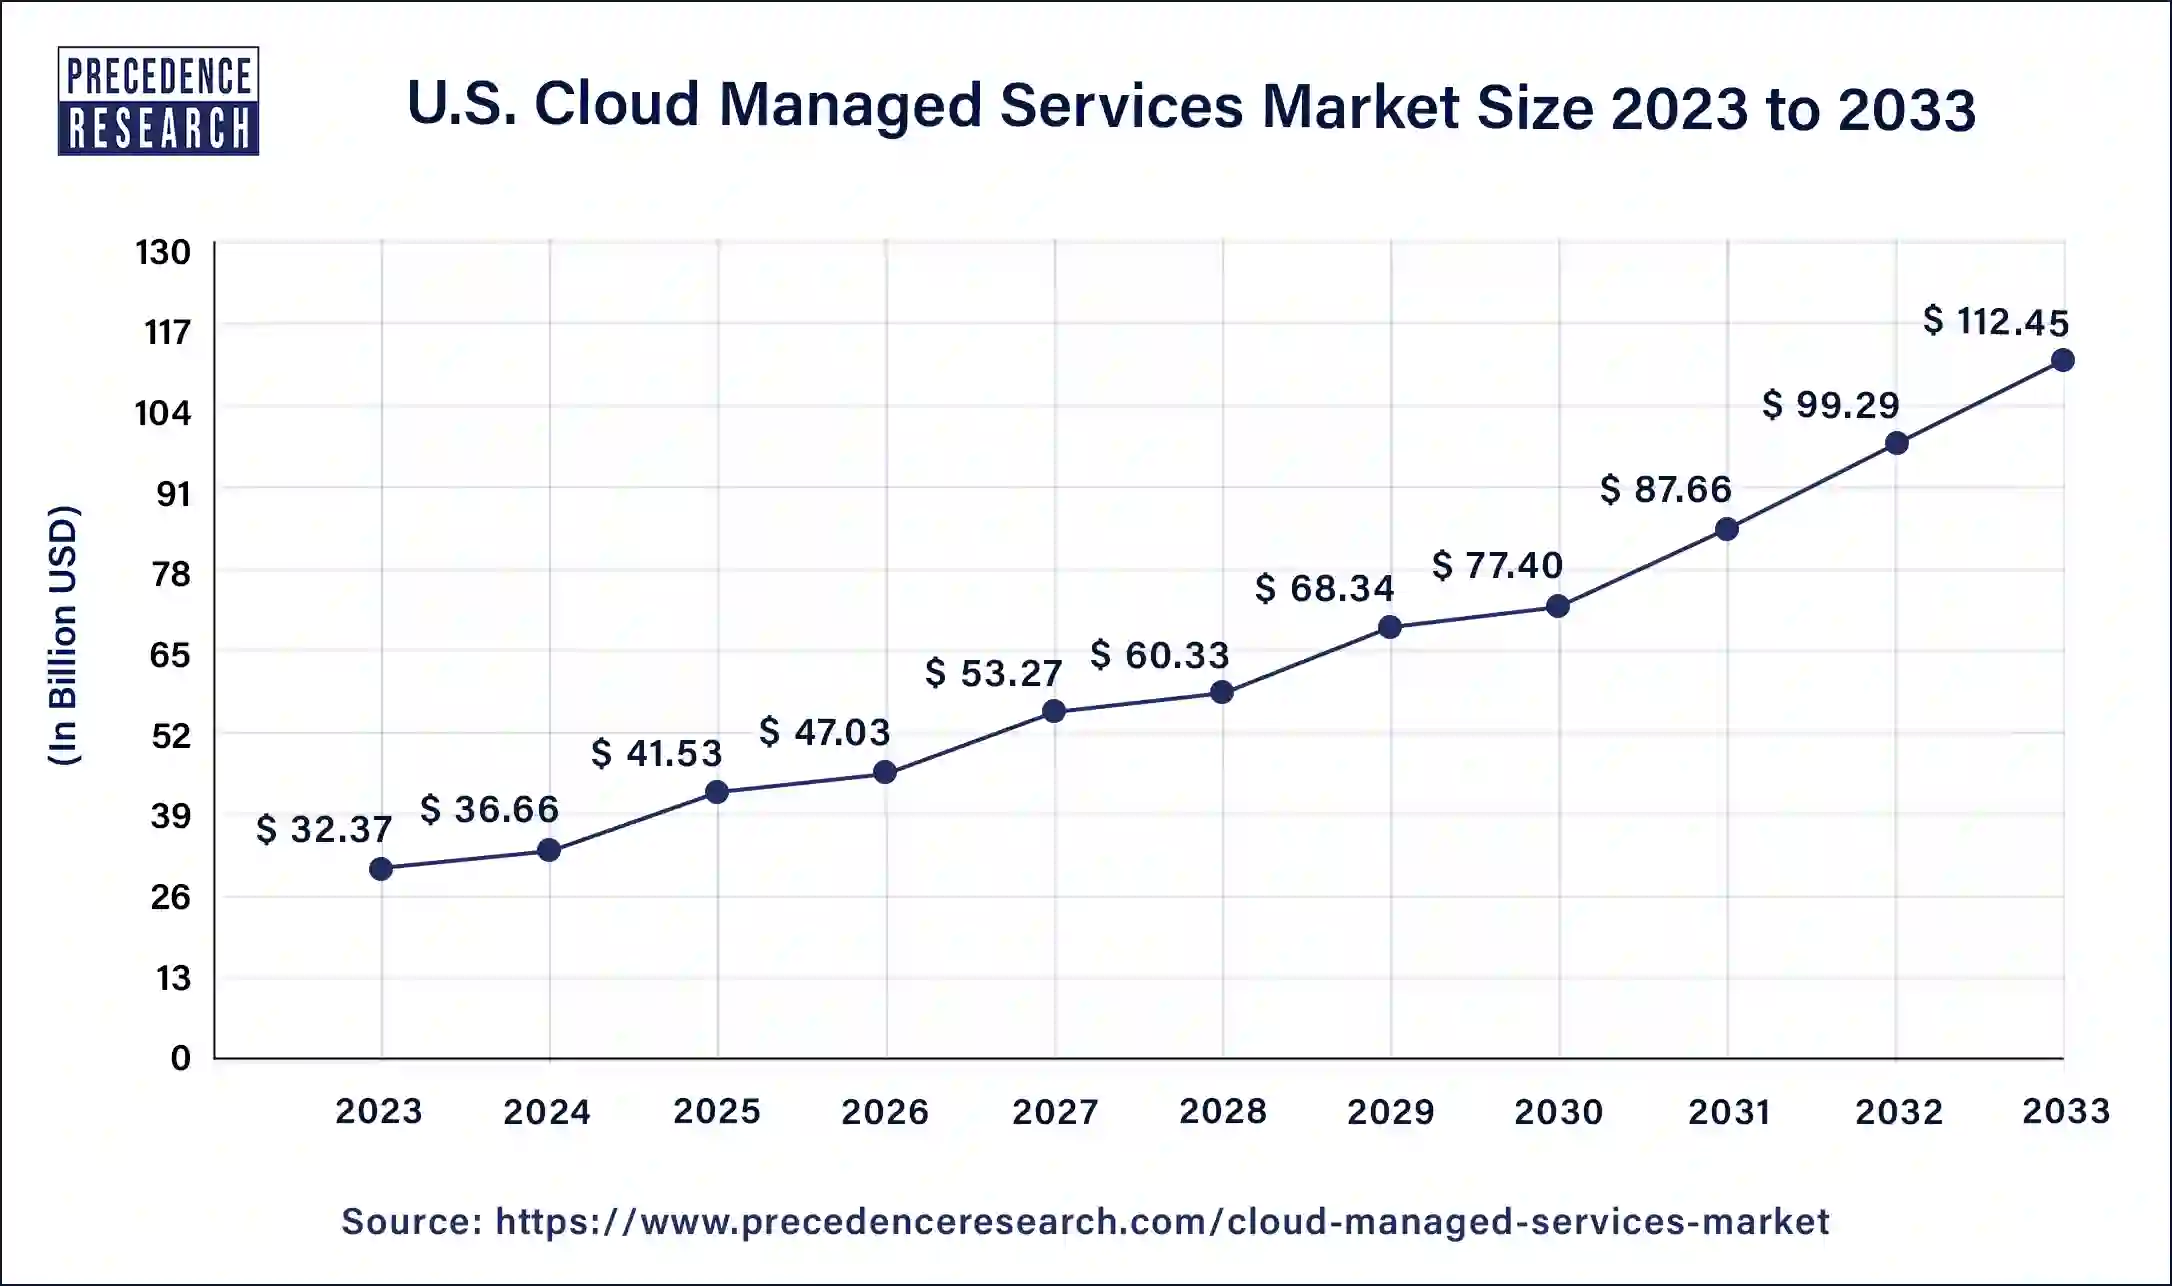 U.S. Cloud Managed Services Market Size 2024 to 2033